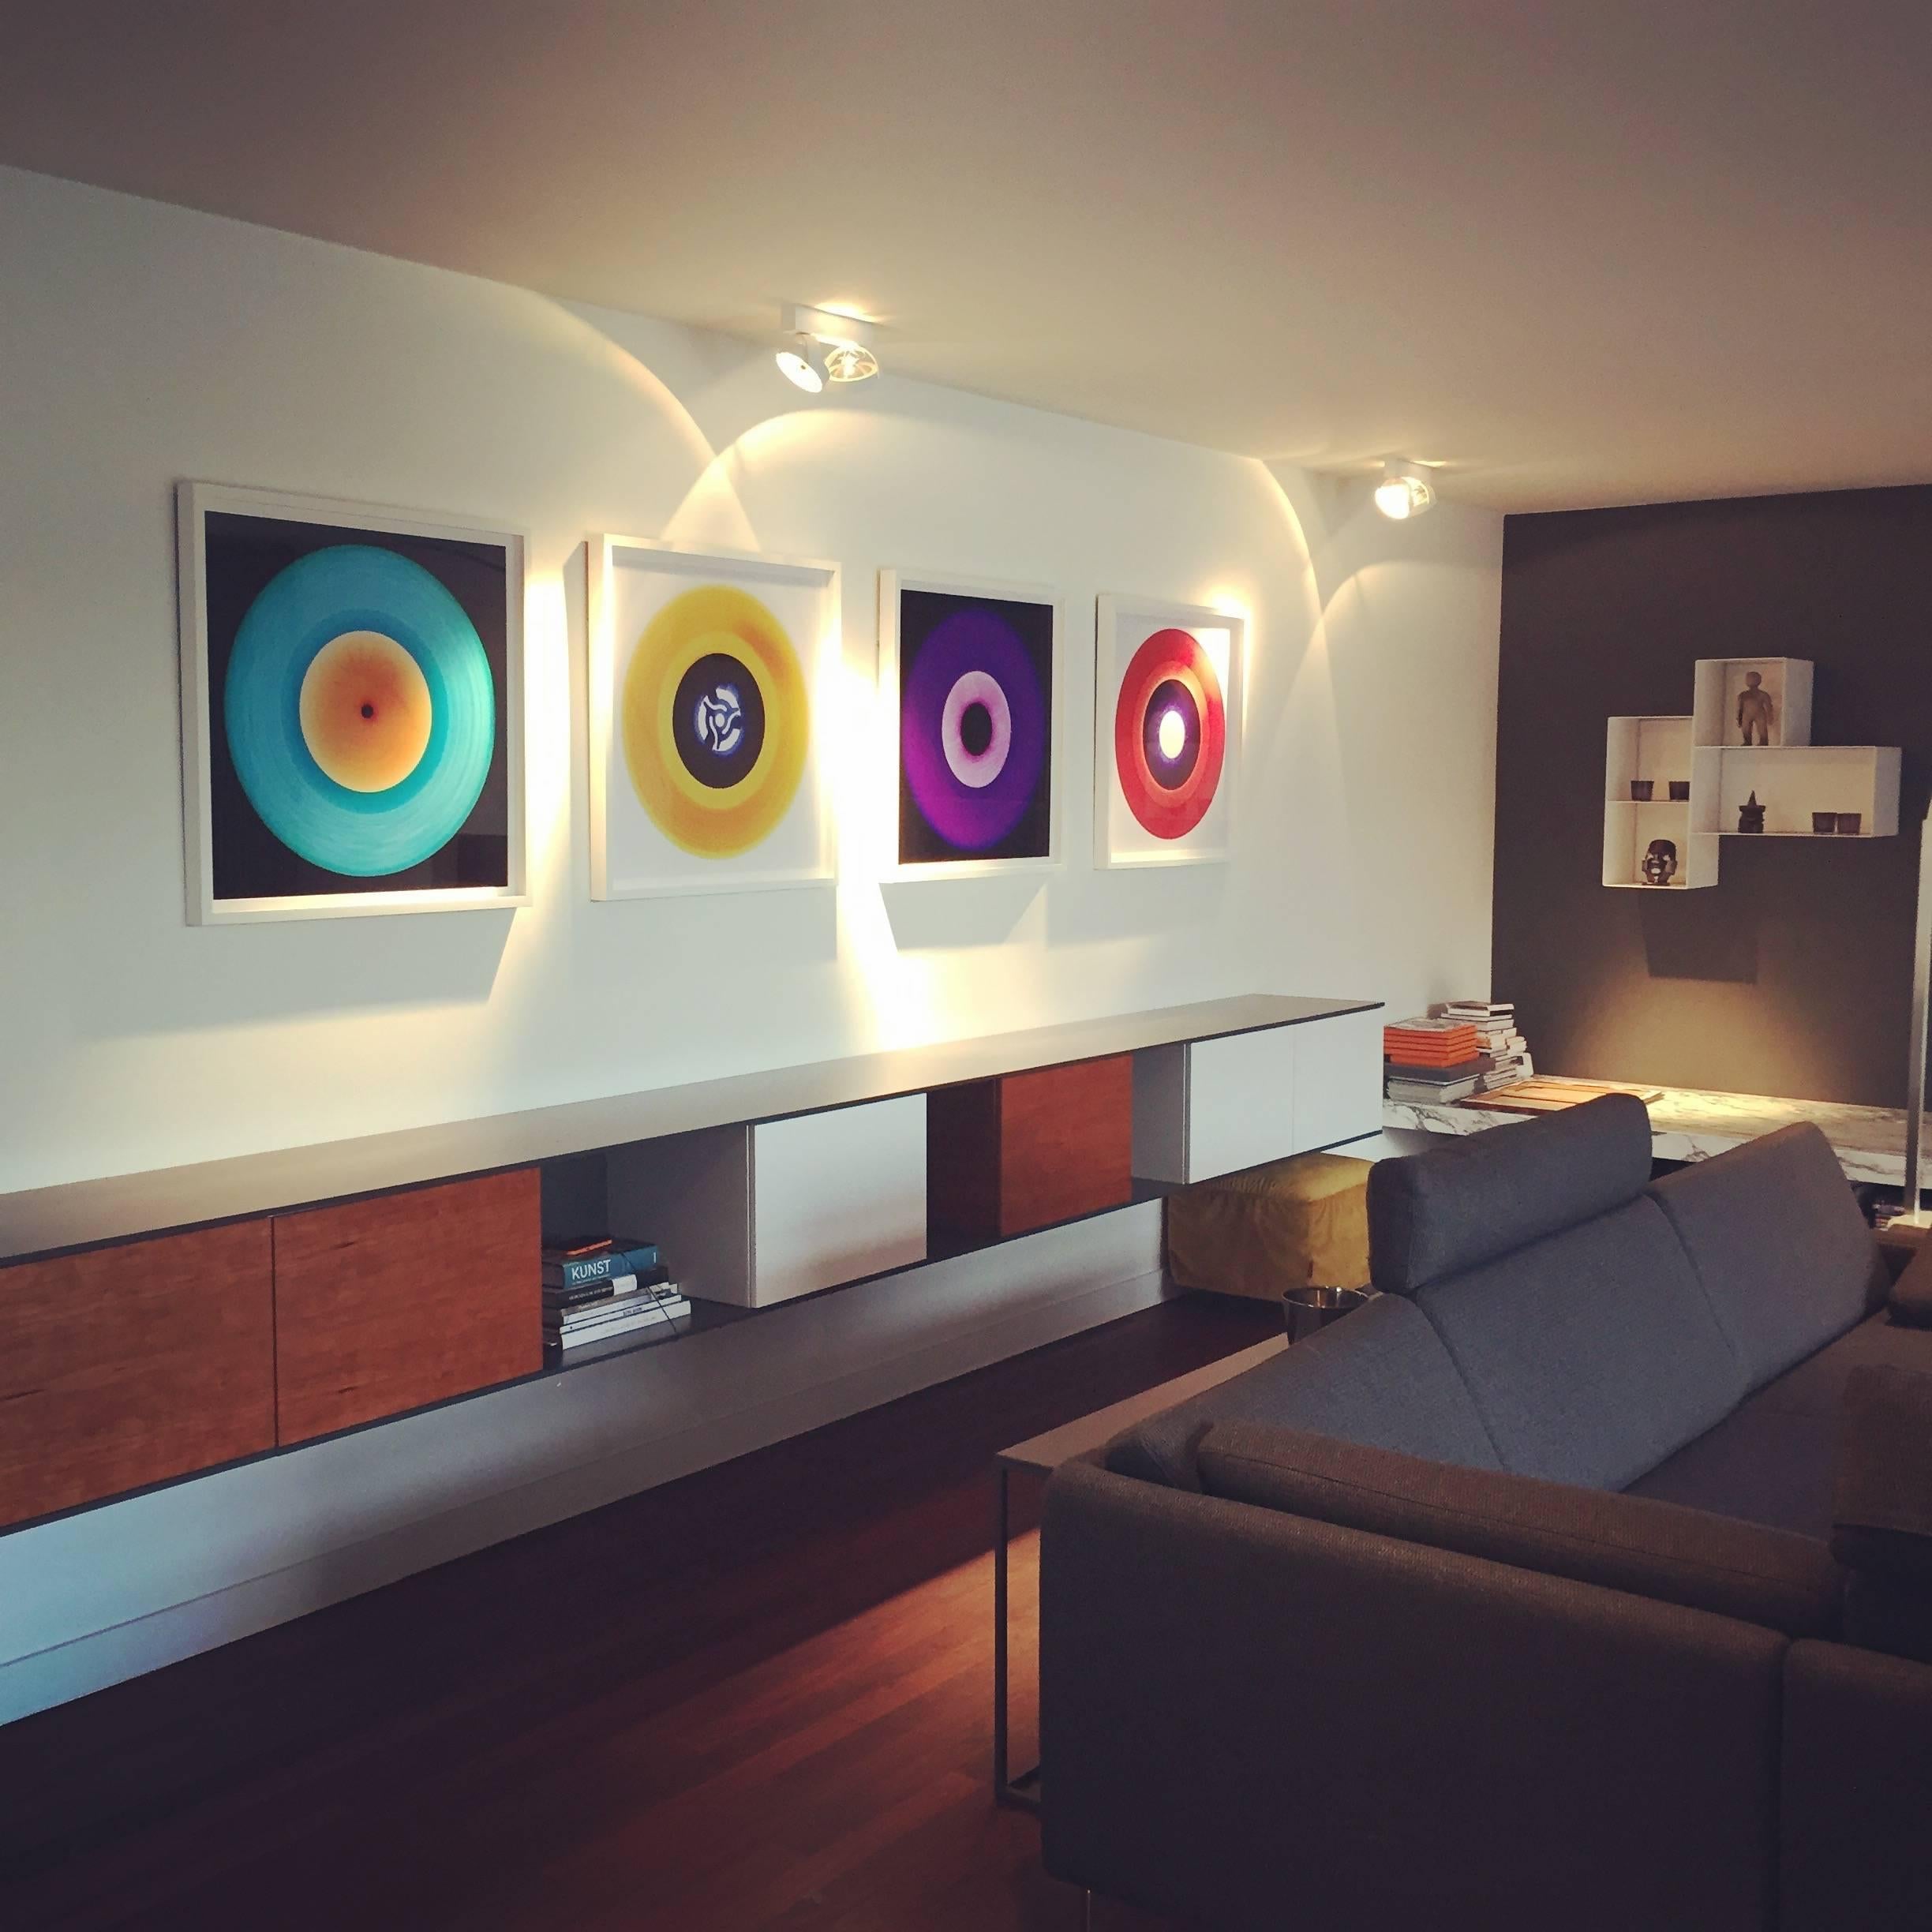 Heidler & Heeps B Side Vinyl Nine Piece Installation.
Acclaimed contemporary photographers, Richard Heeps and Natasha Heidler have collaborated to make this beautifully mesmerising collection. A celebration of the vinyl record and analogue